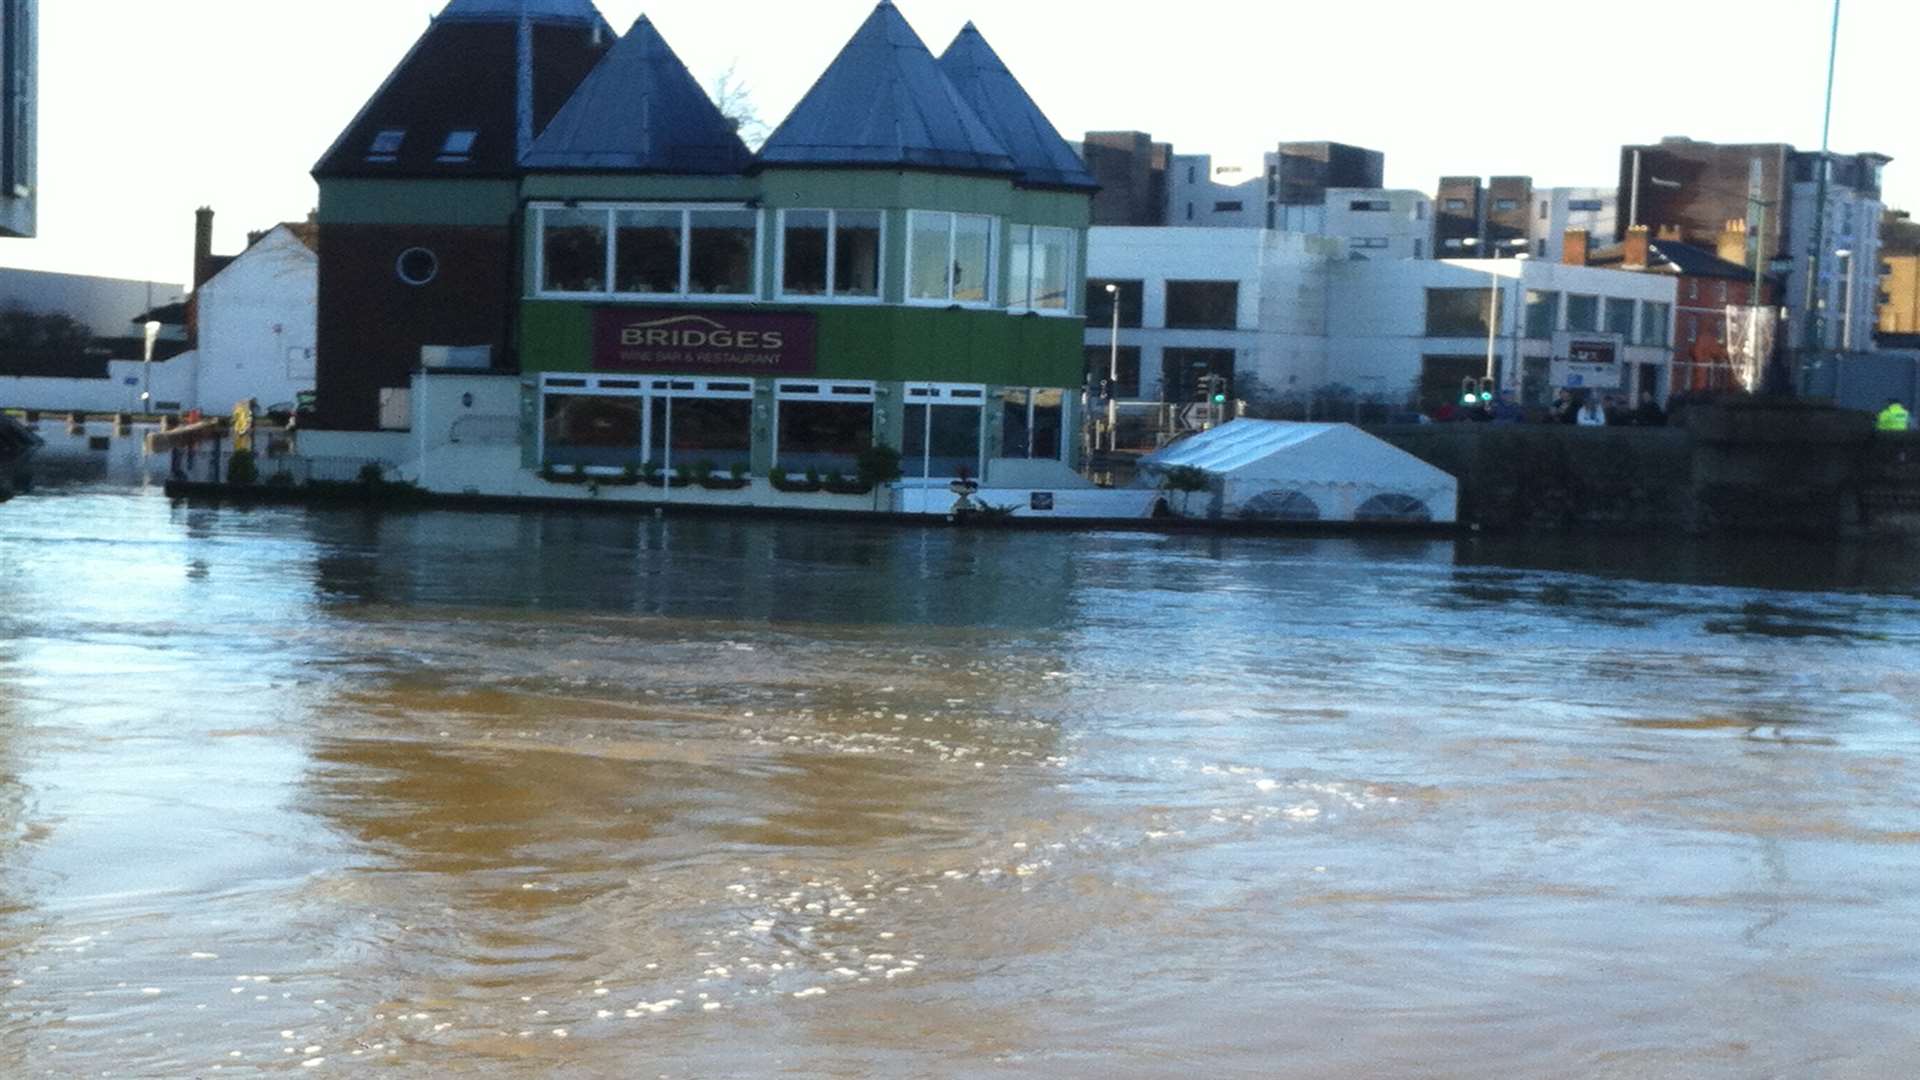 The River Medway floods on Christmas Day